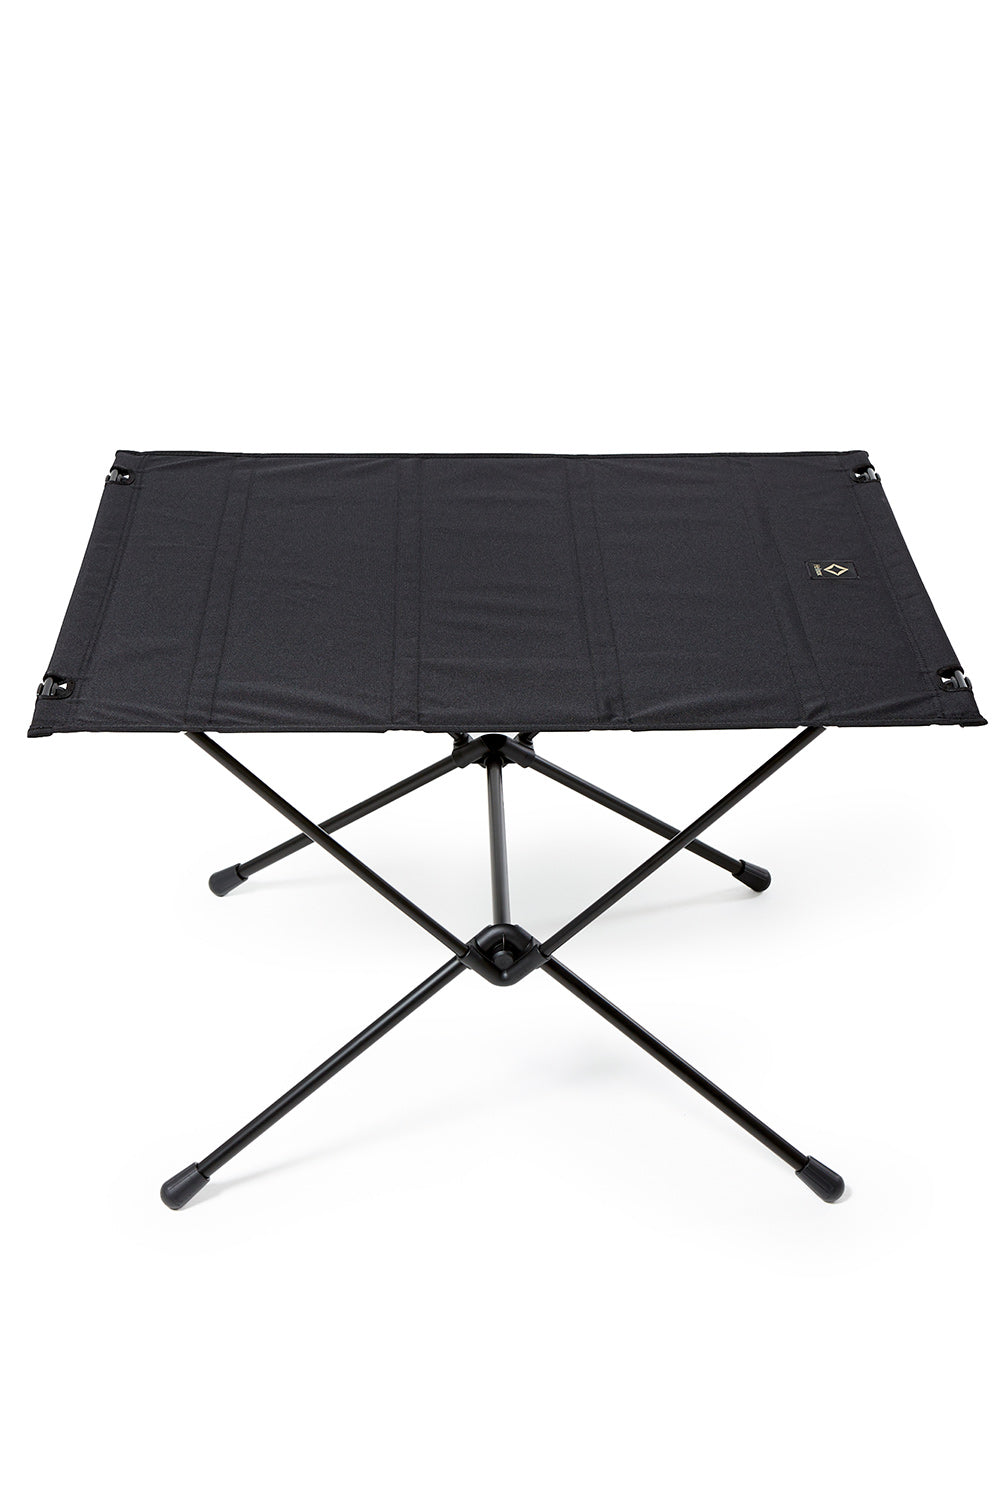 Helinox Tactical Table - Large - Black